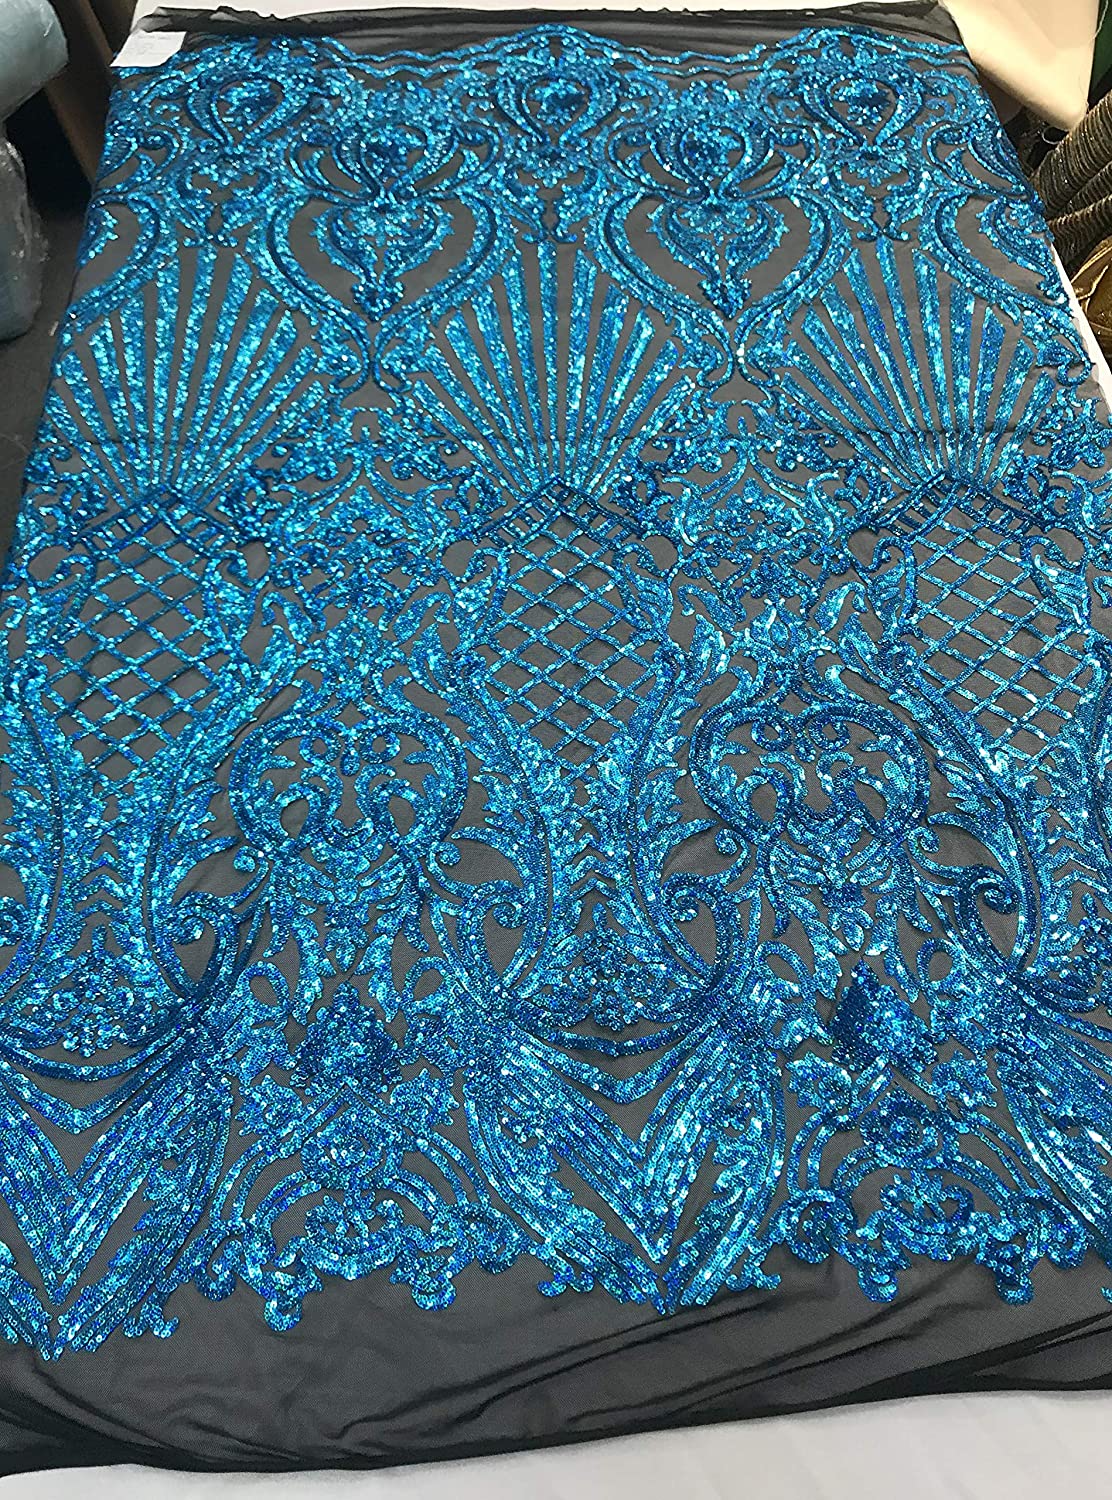 Damask Sequins Design on a 4 Way Stretch Mesh Fabric - for Night Gowns - Prom Dresses - (Turquoise Iridescent on Black, 1 Yard)